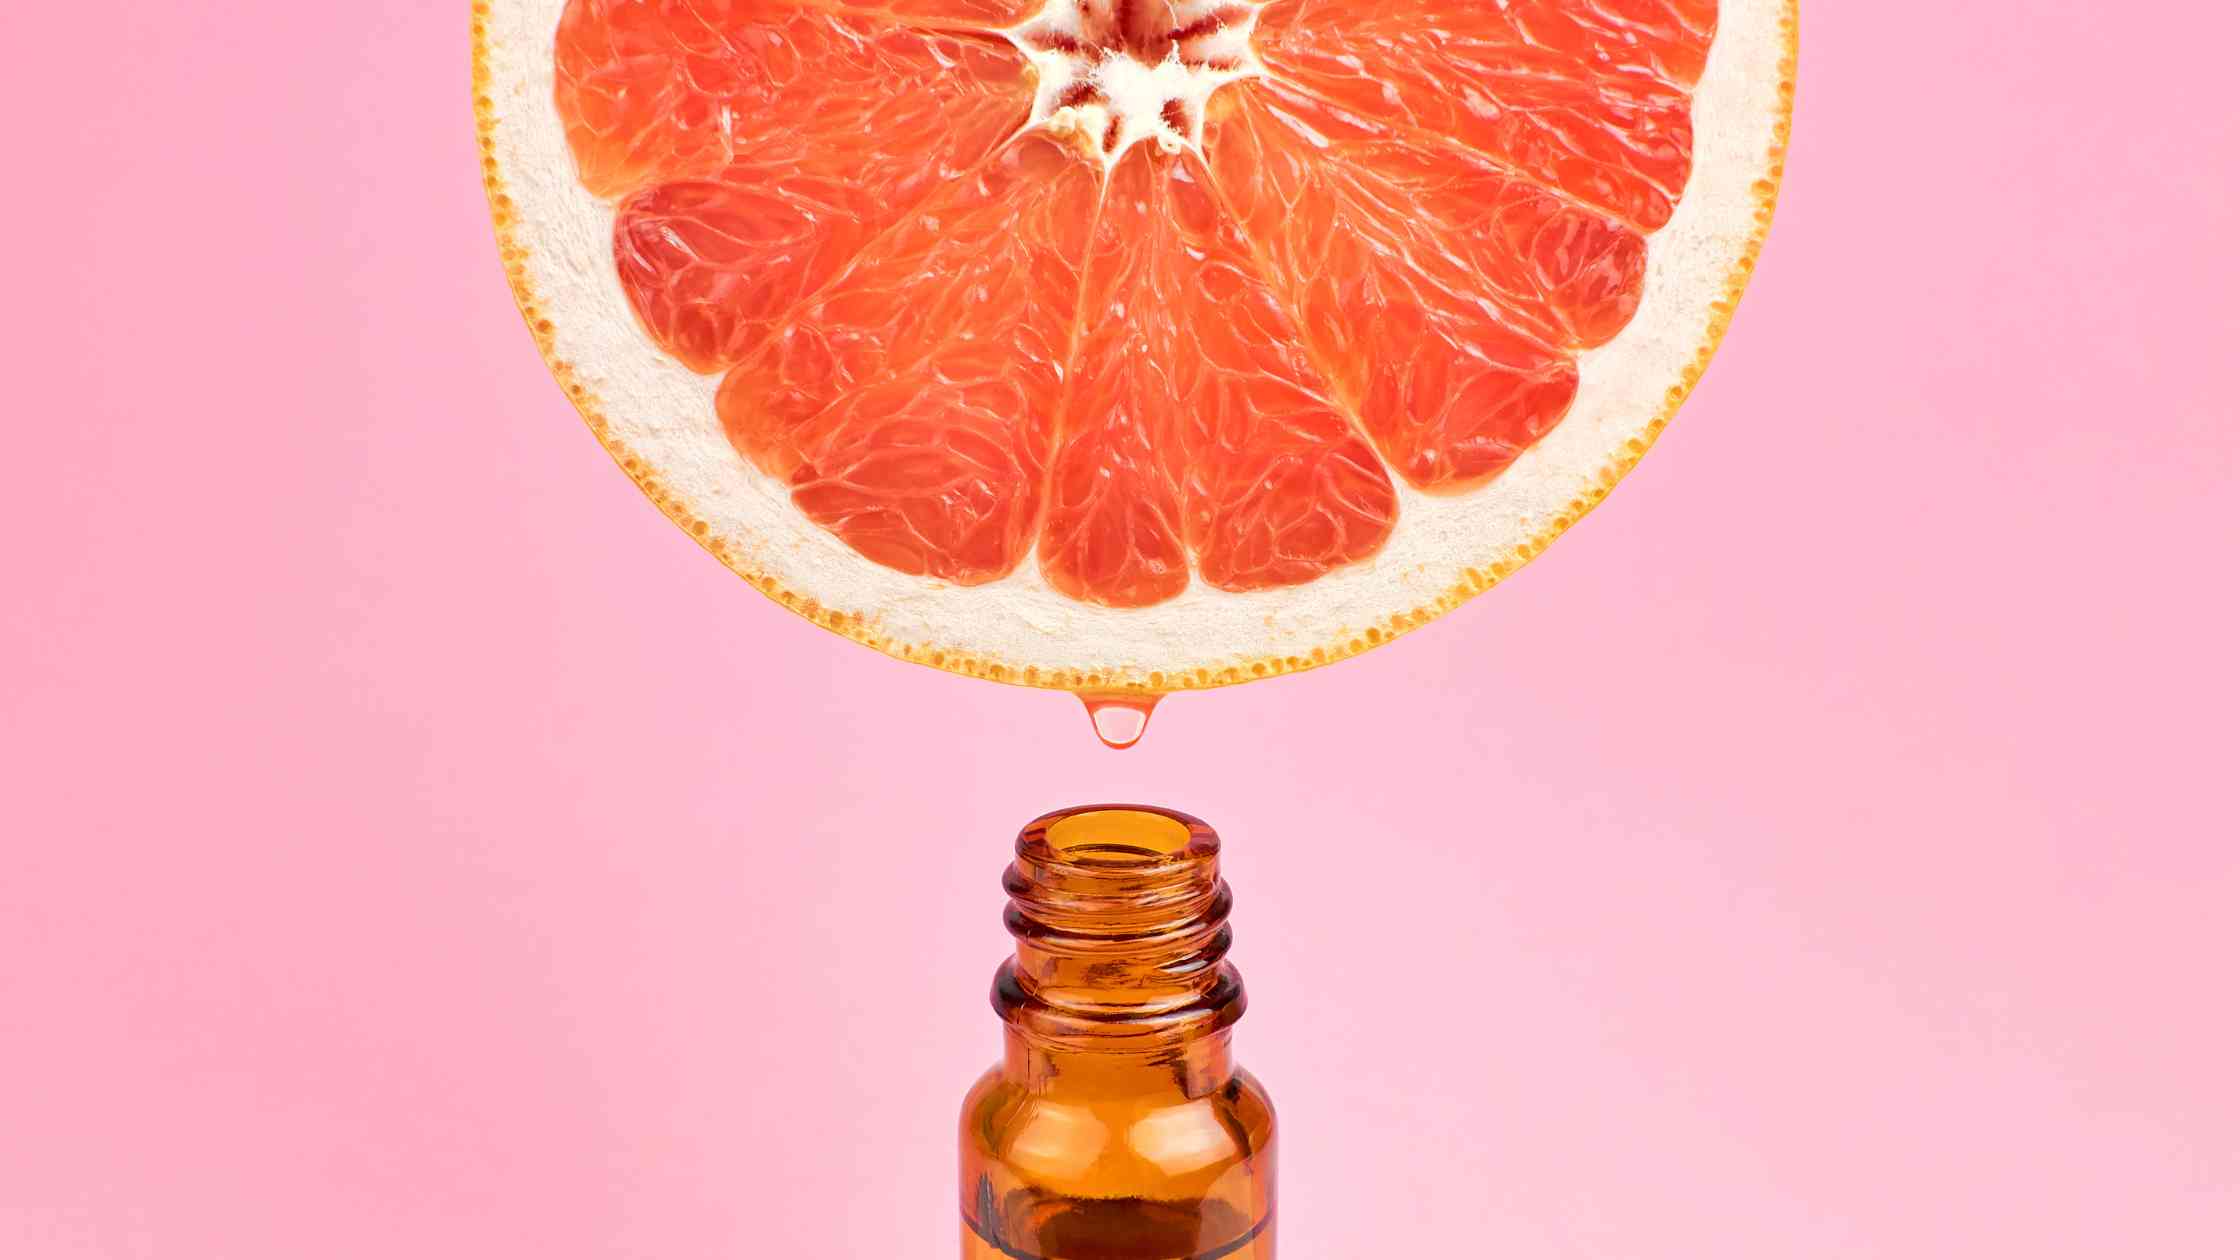 Fresh grapefruit juice being poured from above into an essential oil bottle